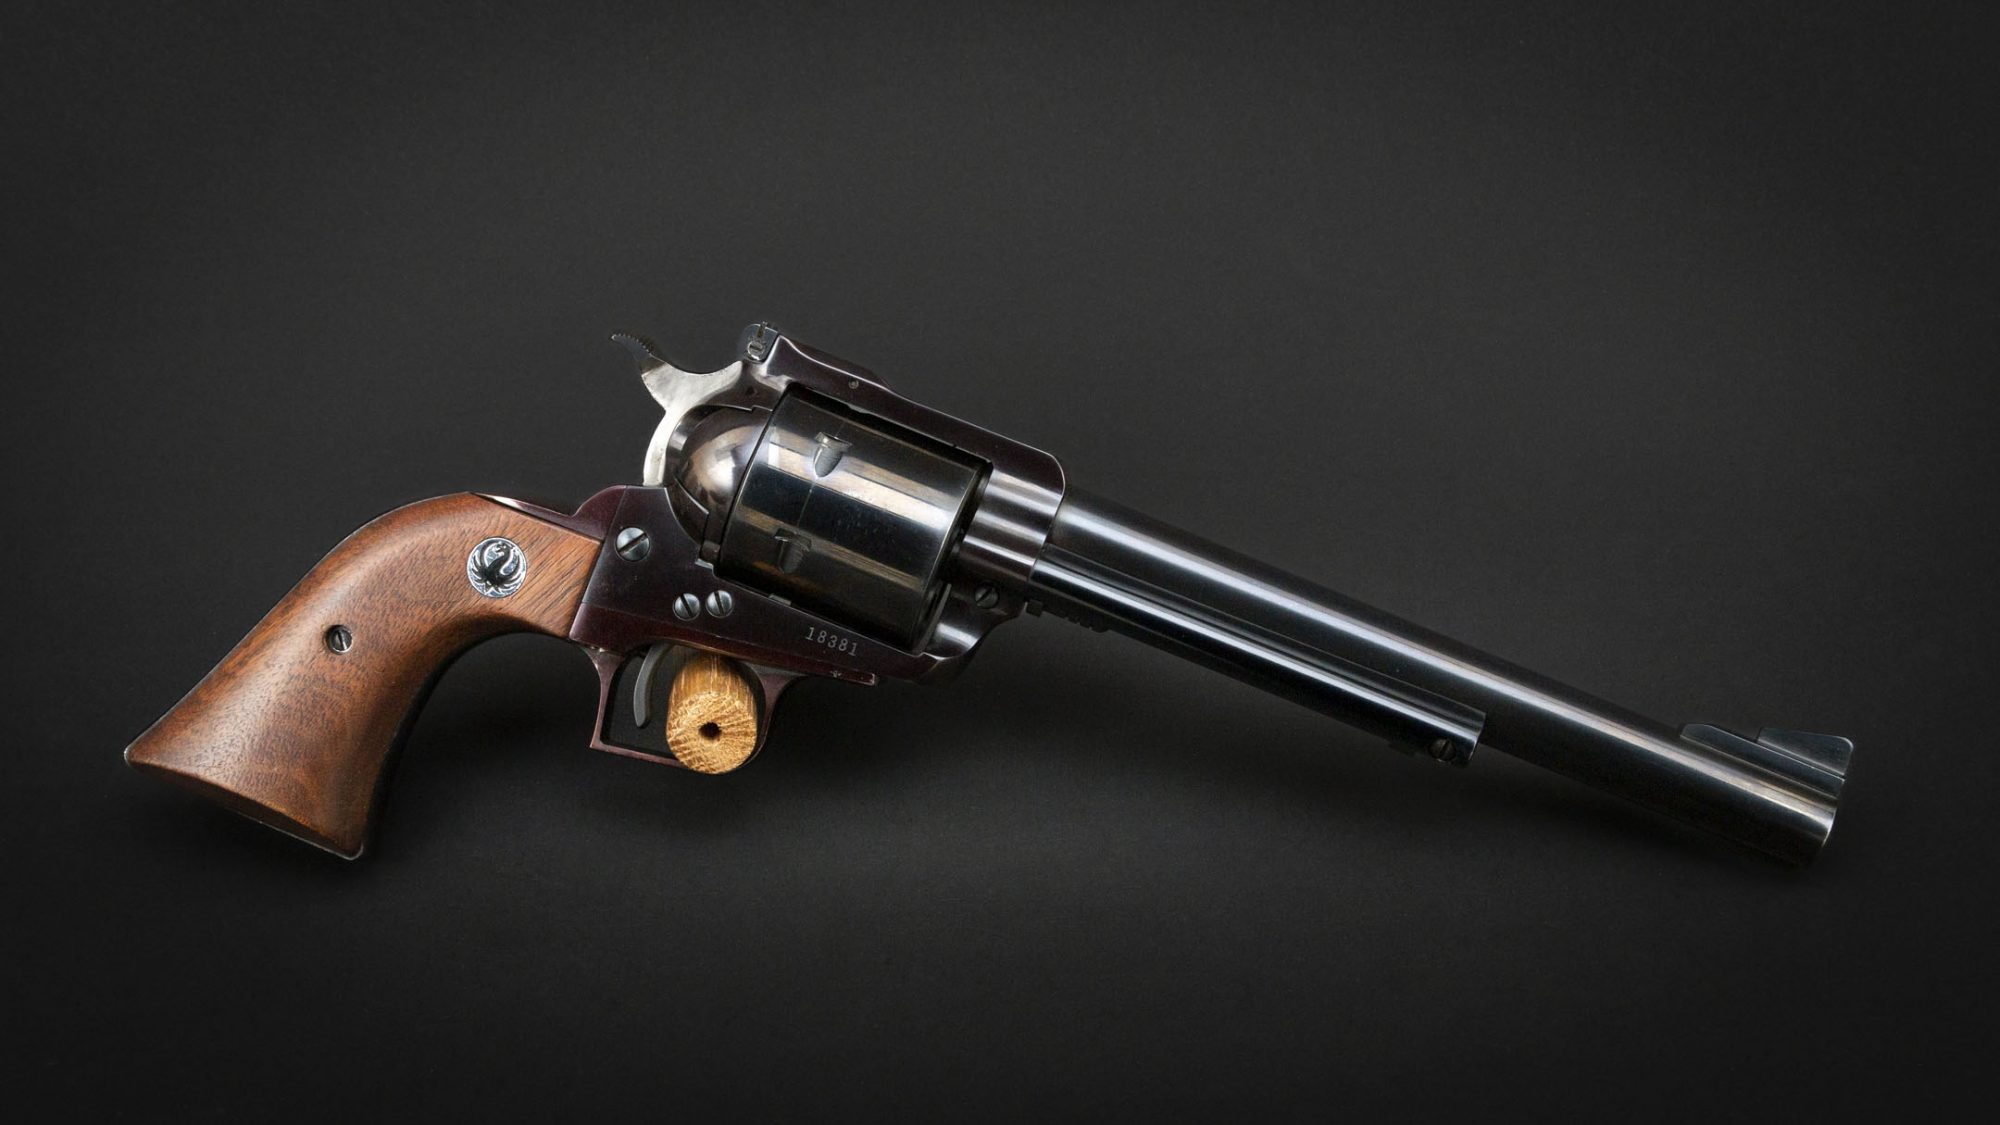 Ruger Super Blackhawk chambered in .44 Magnum, for sale by Turnbull Restoration Co. of Bloomfield, NY